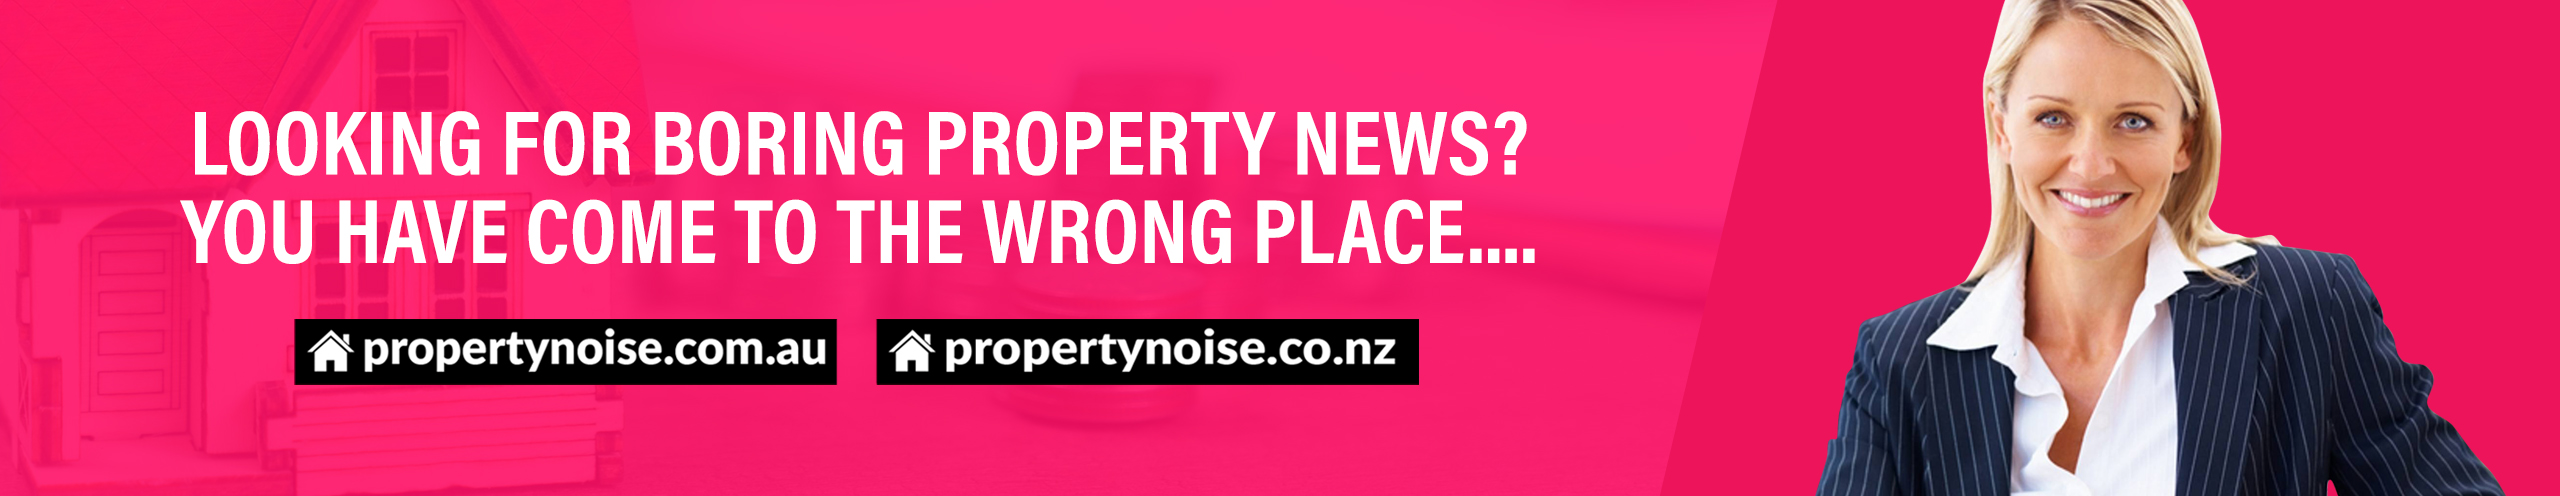 Property Noise BANNER